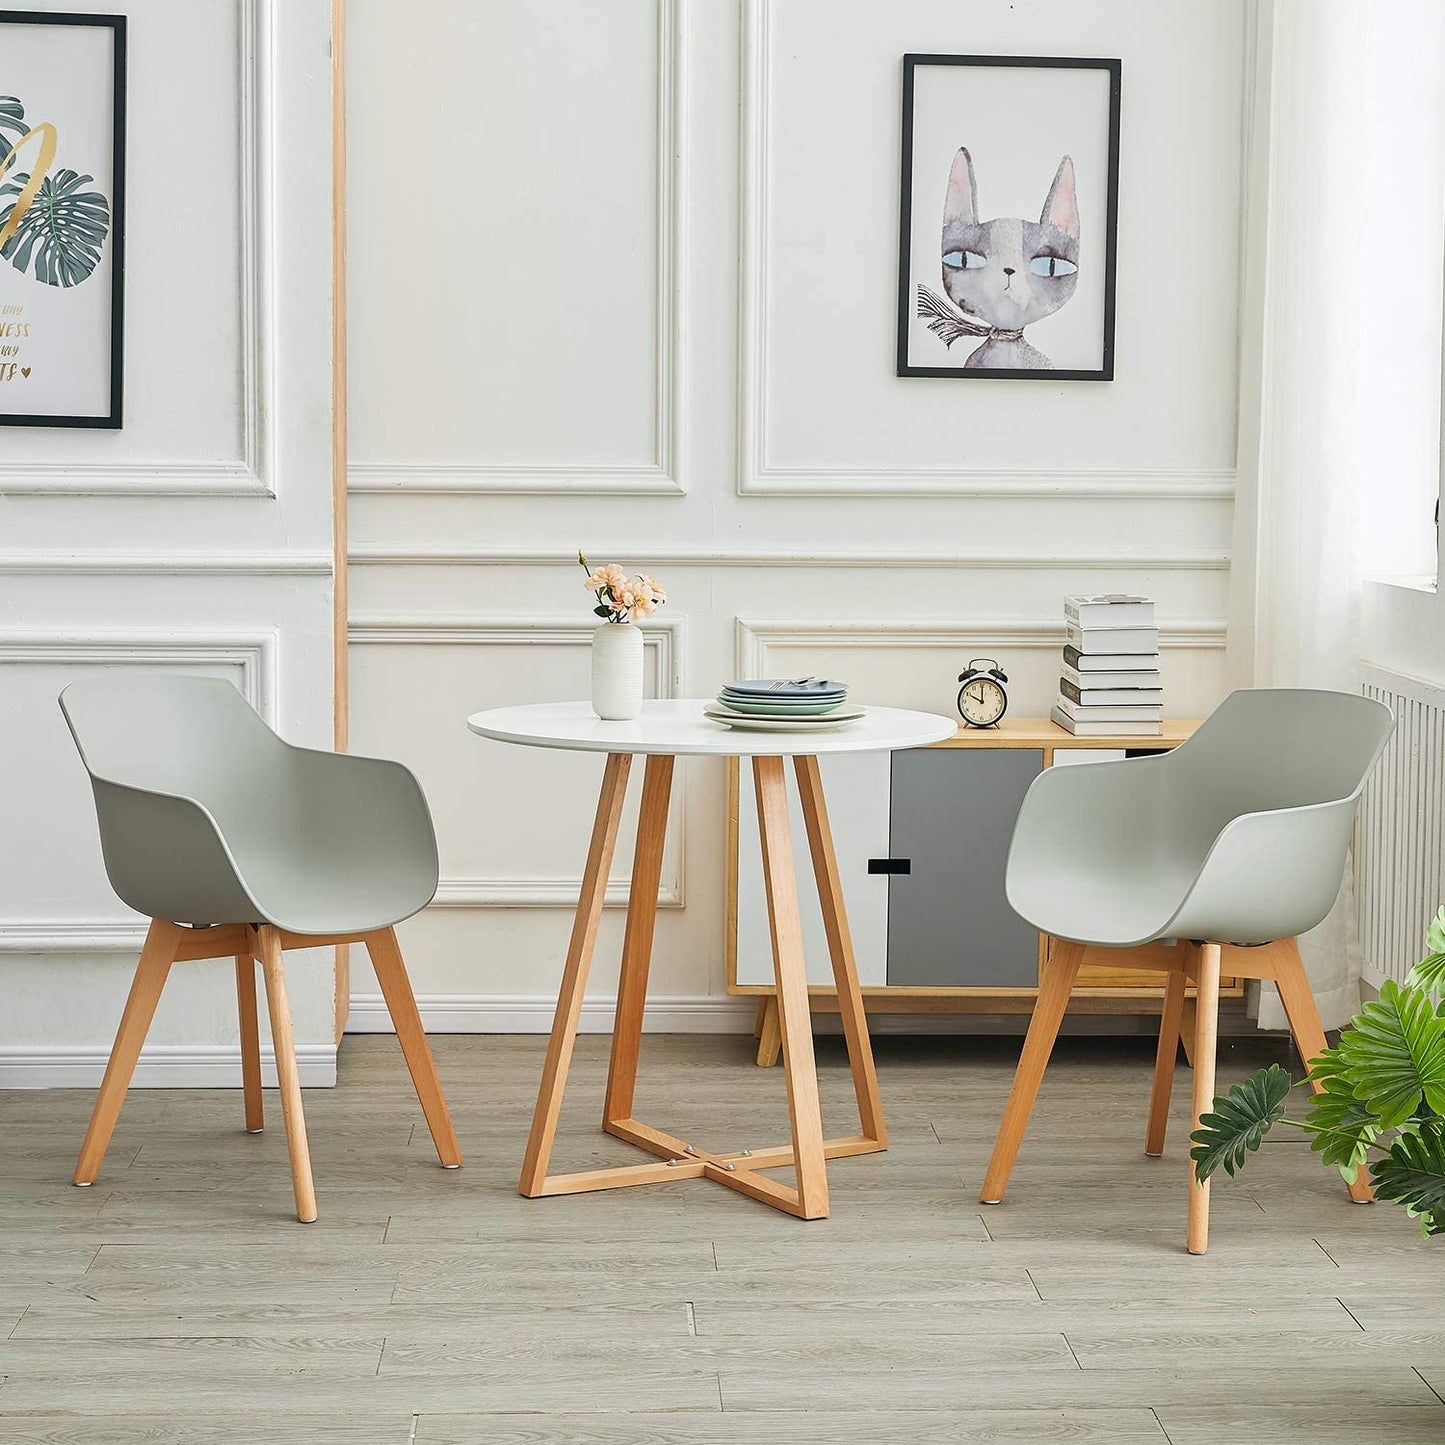 CLOVER PP Dining Chair with Solid Beech Legs - Black/White/Grey